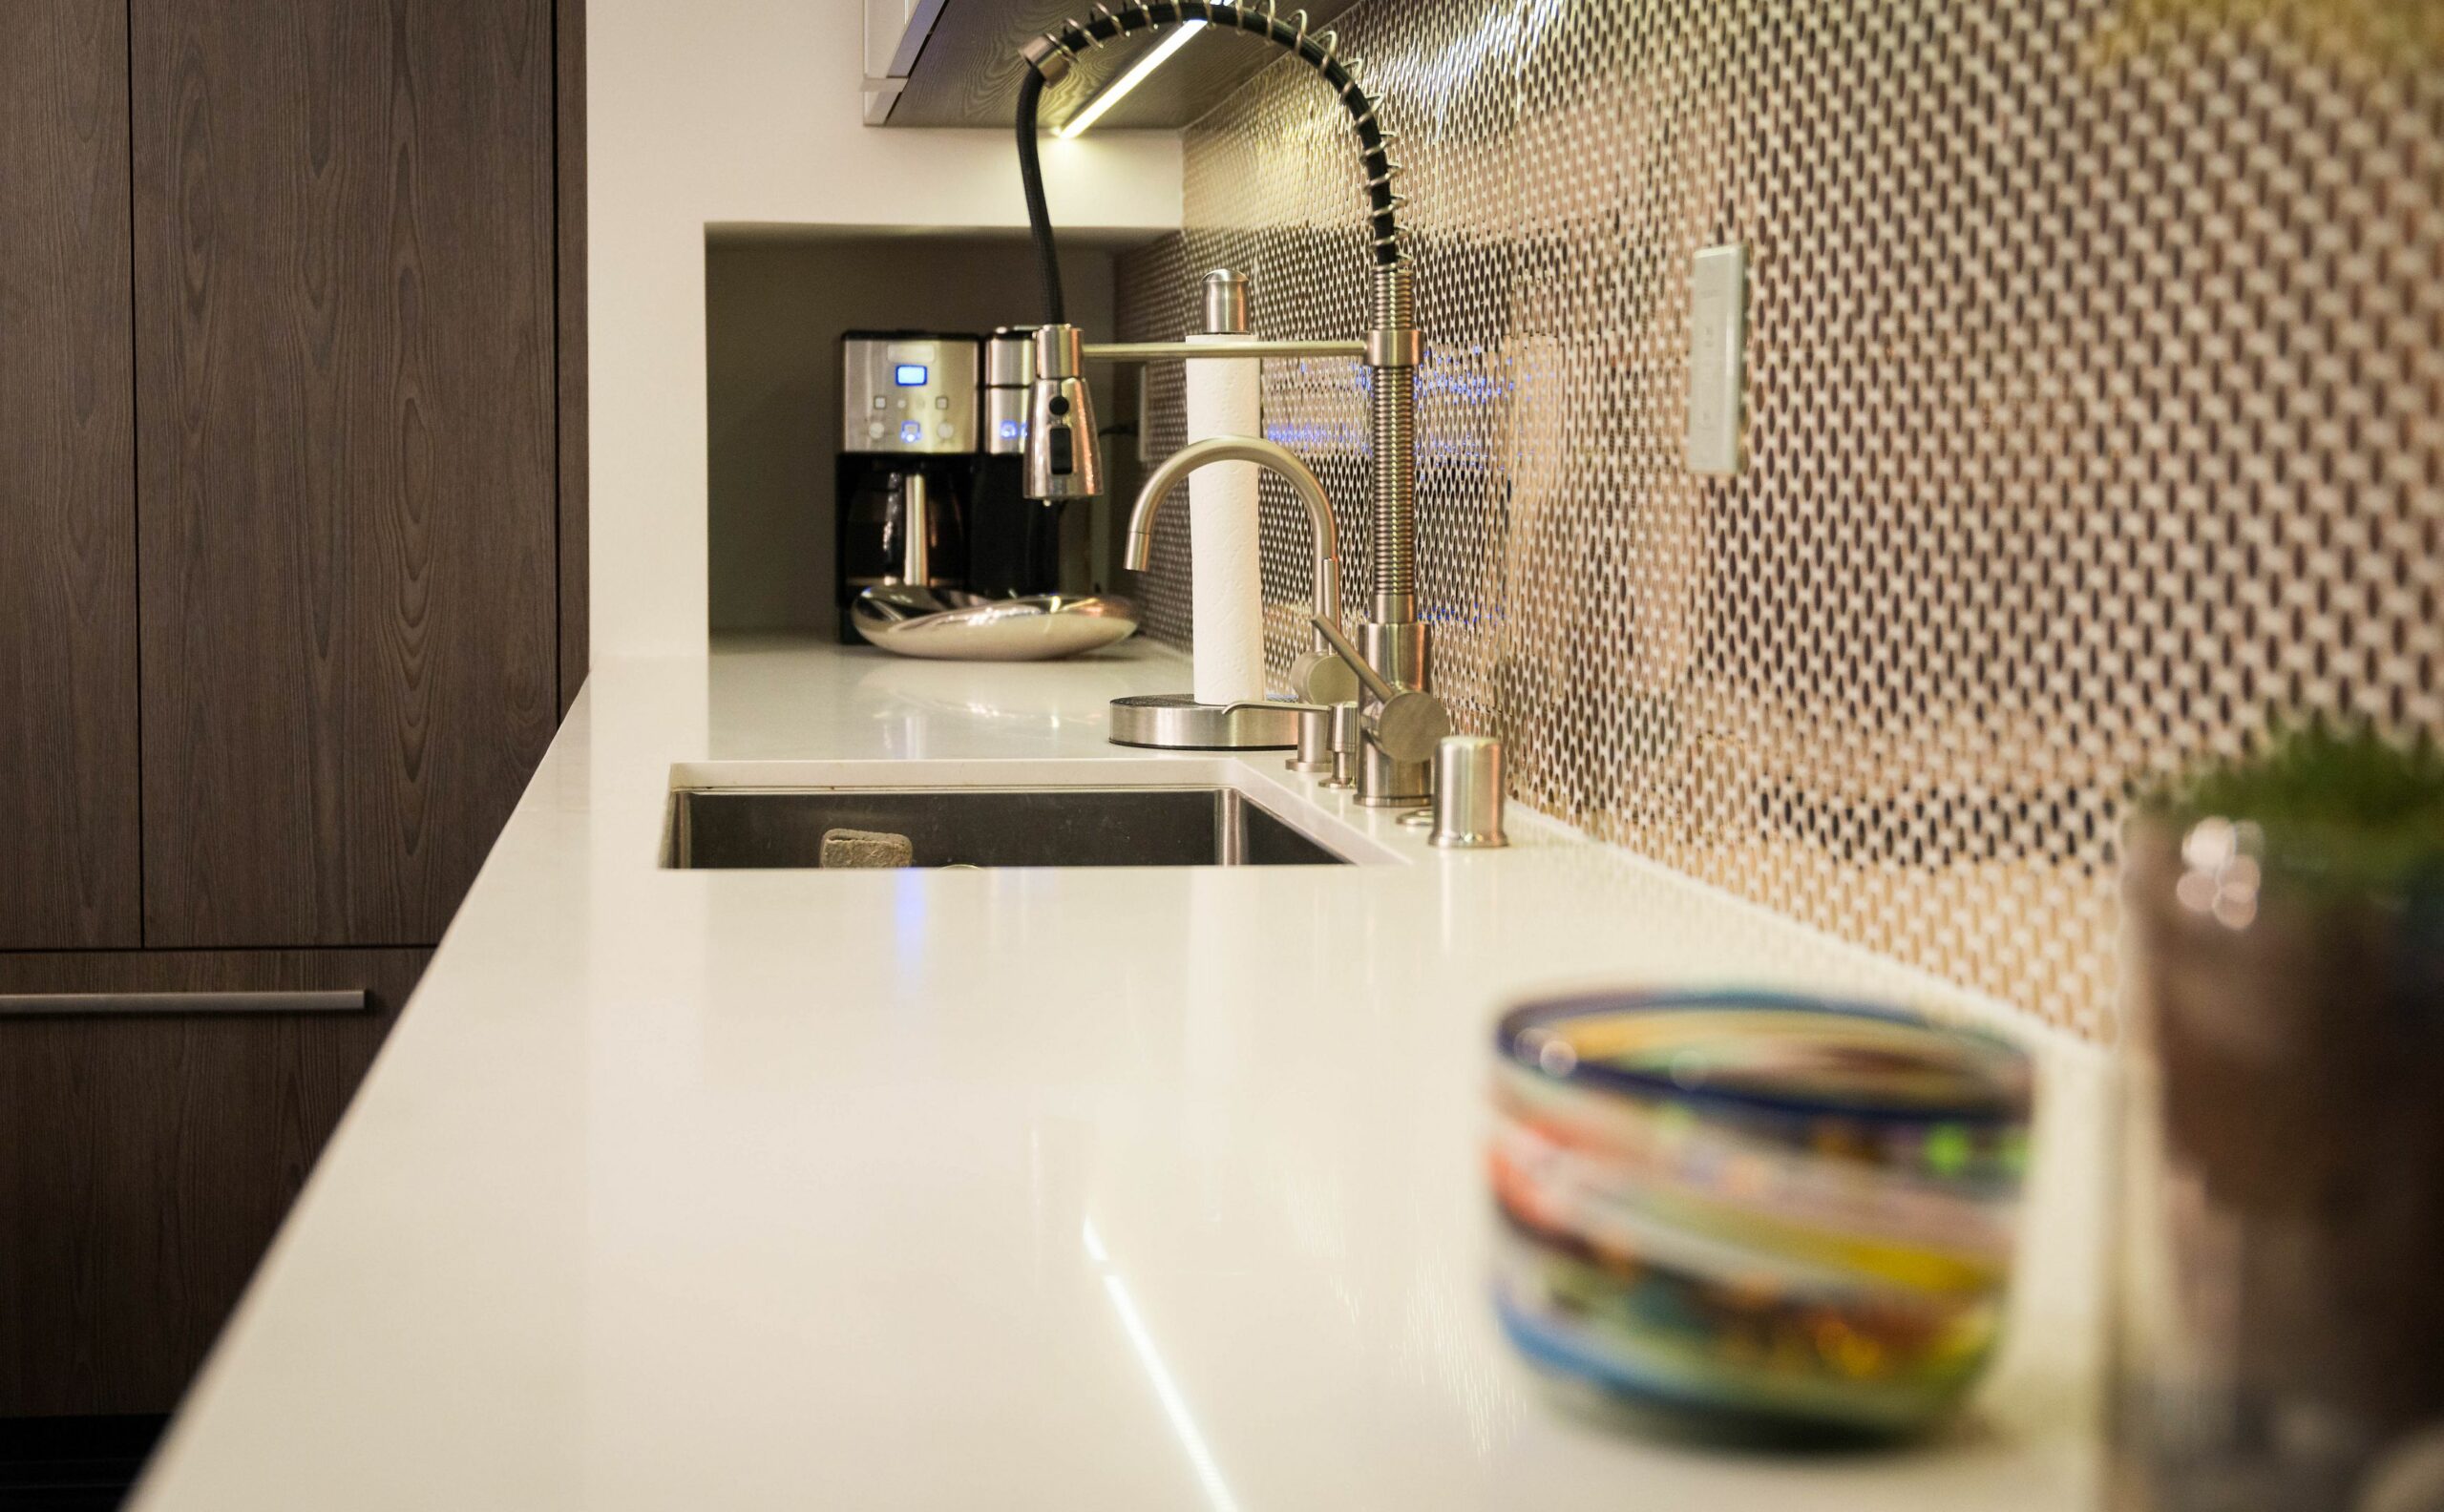 Modern kitchen interior with mosaic backsplash and stainless faucet.